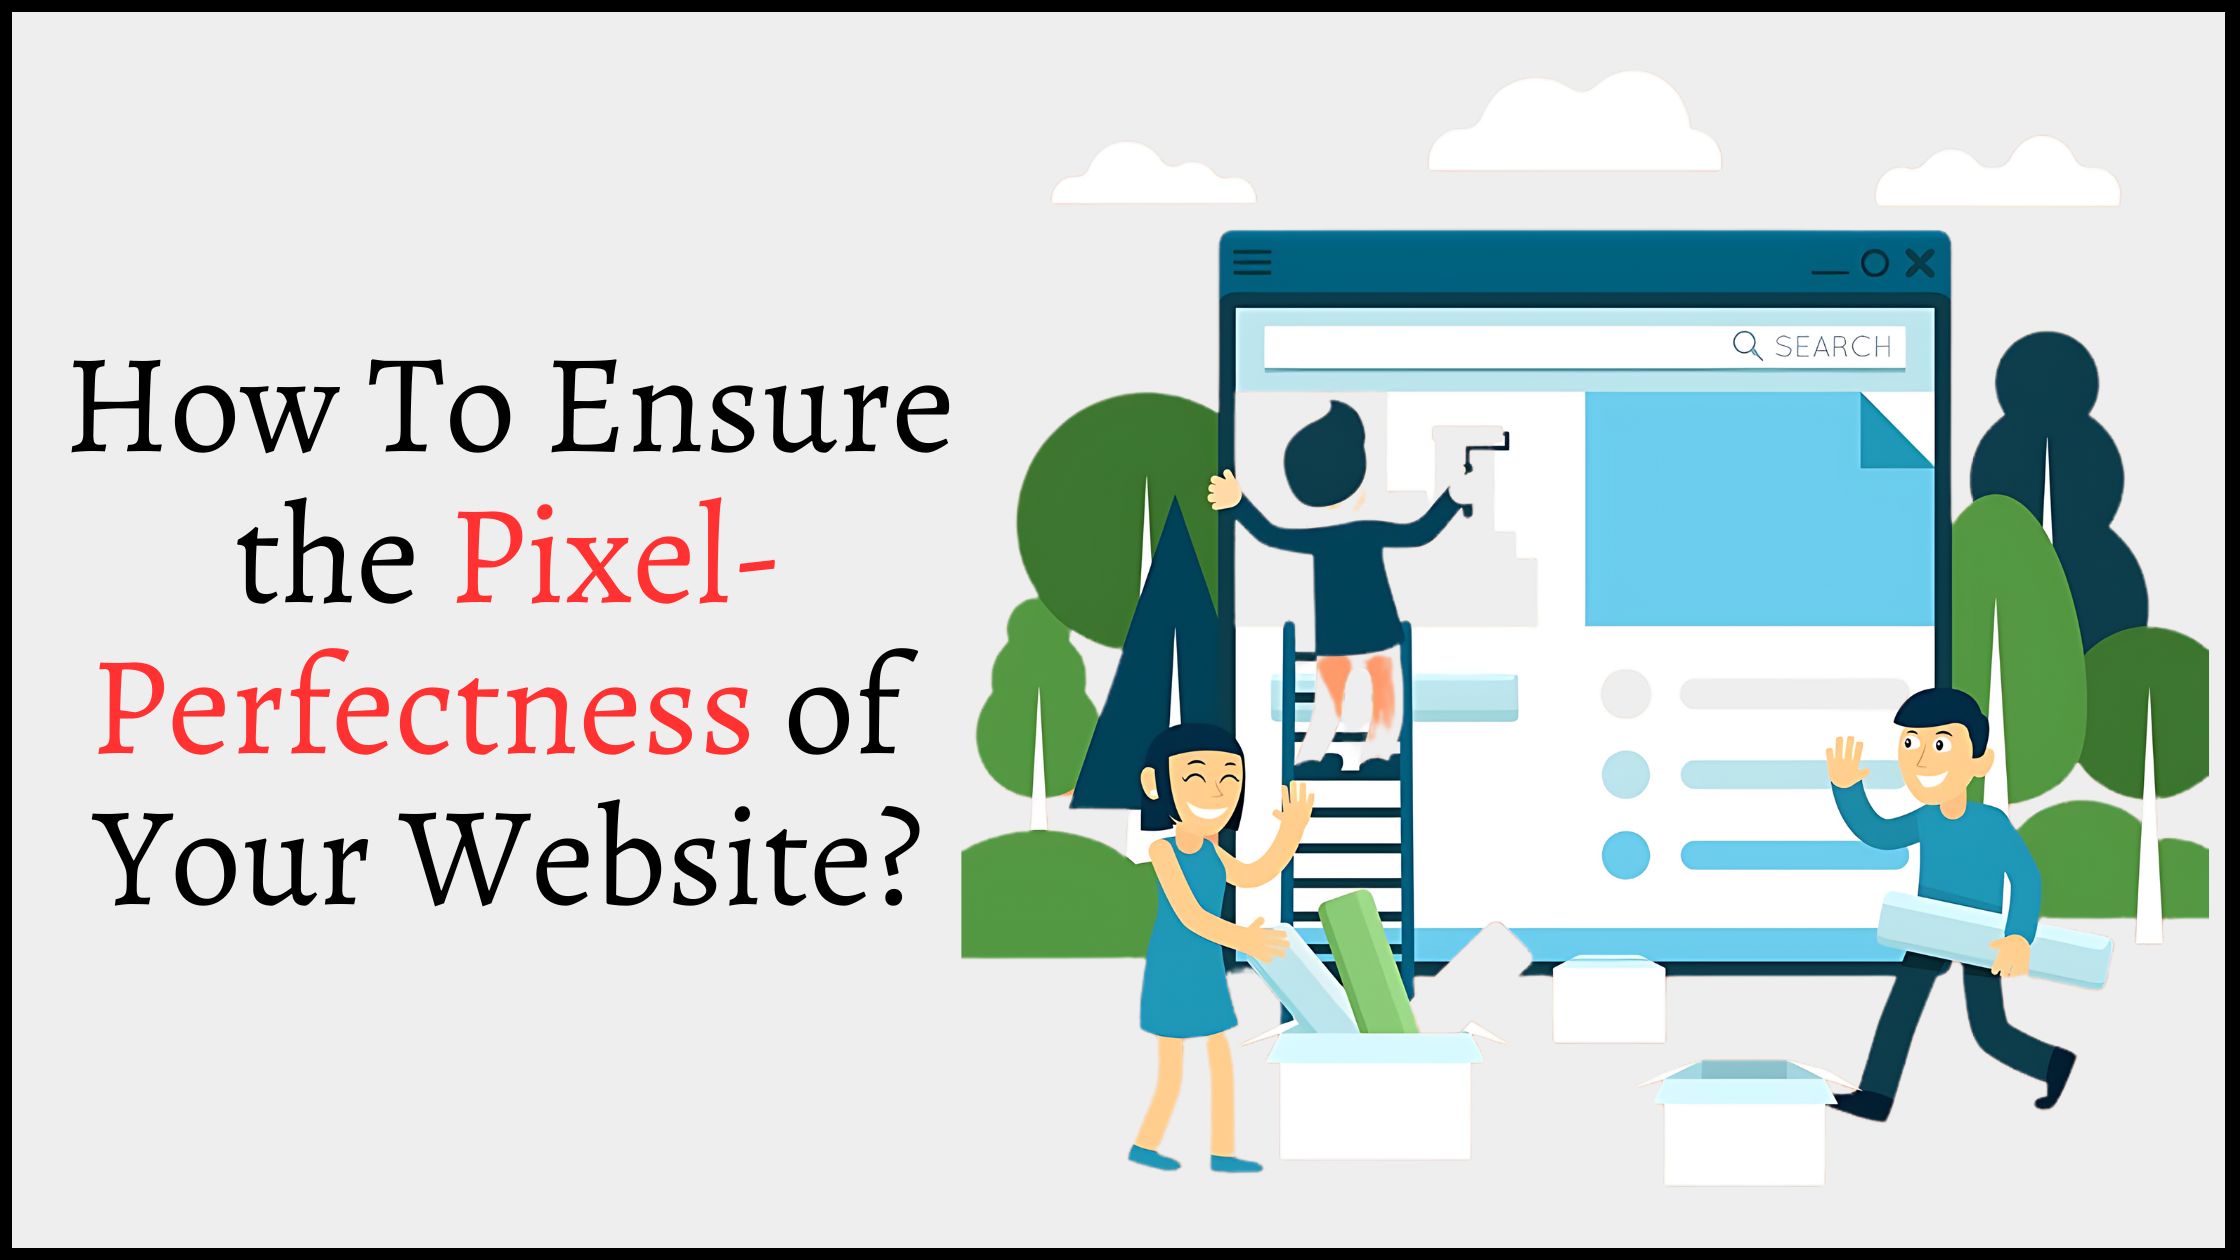 How To Ensure the Pixel-Perfectness of Your Website?